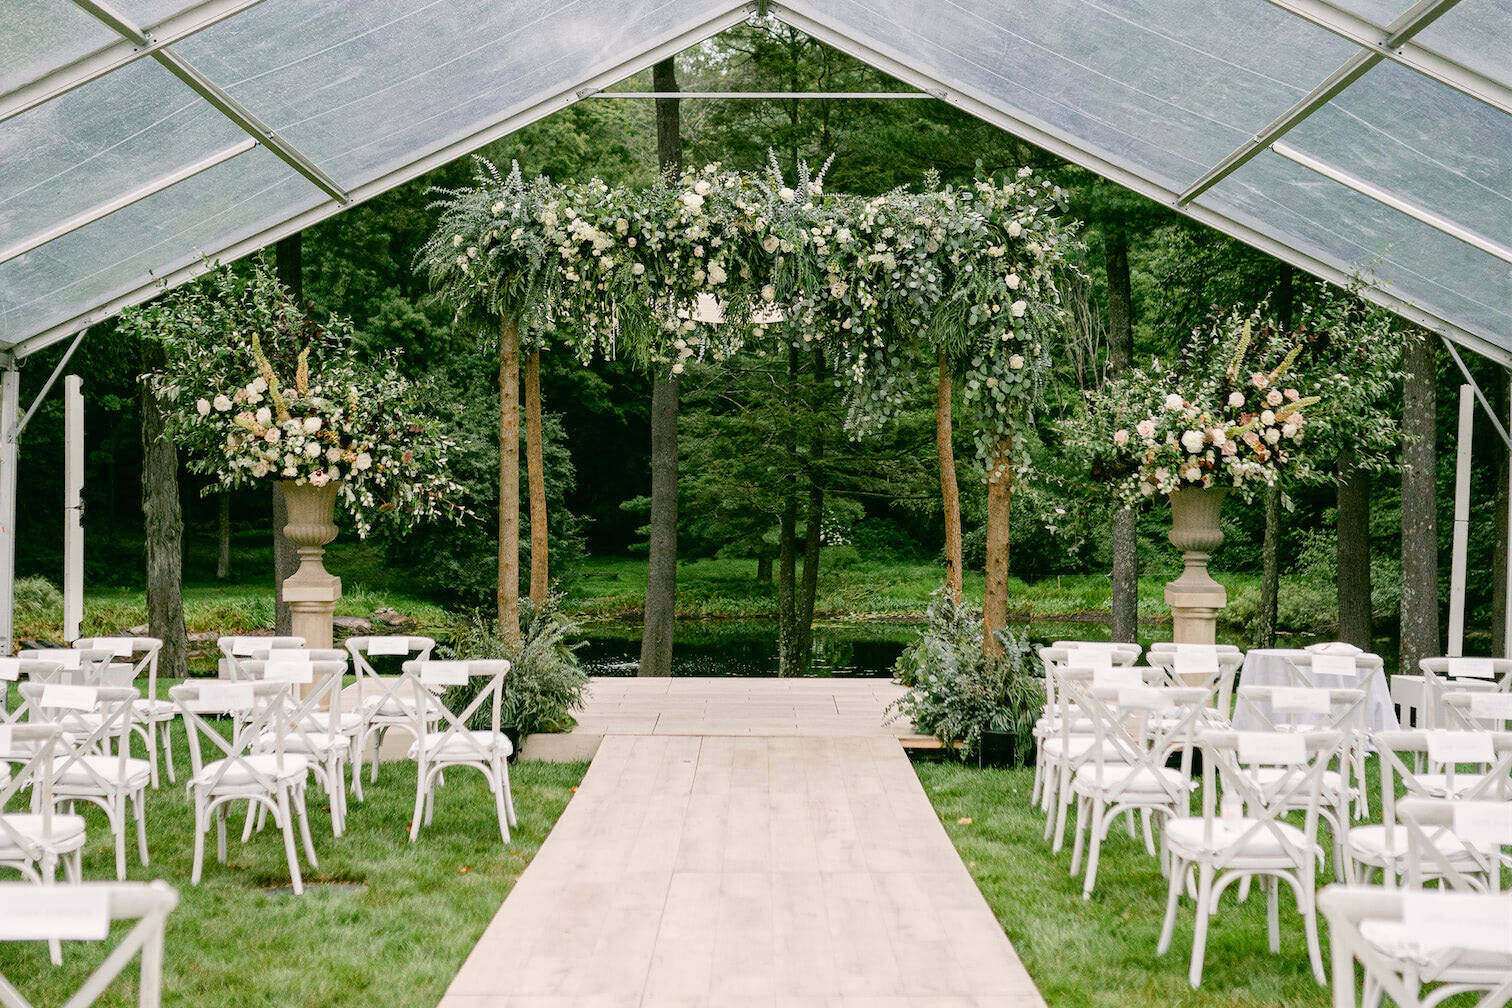 Wedding details: A flower-covered chuppah set up under a clear tent for a Jewish wedding ceremony.